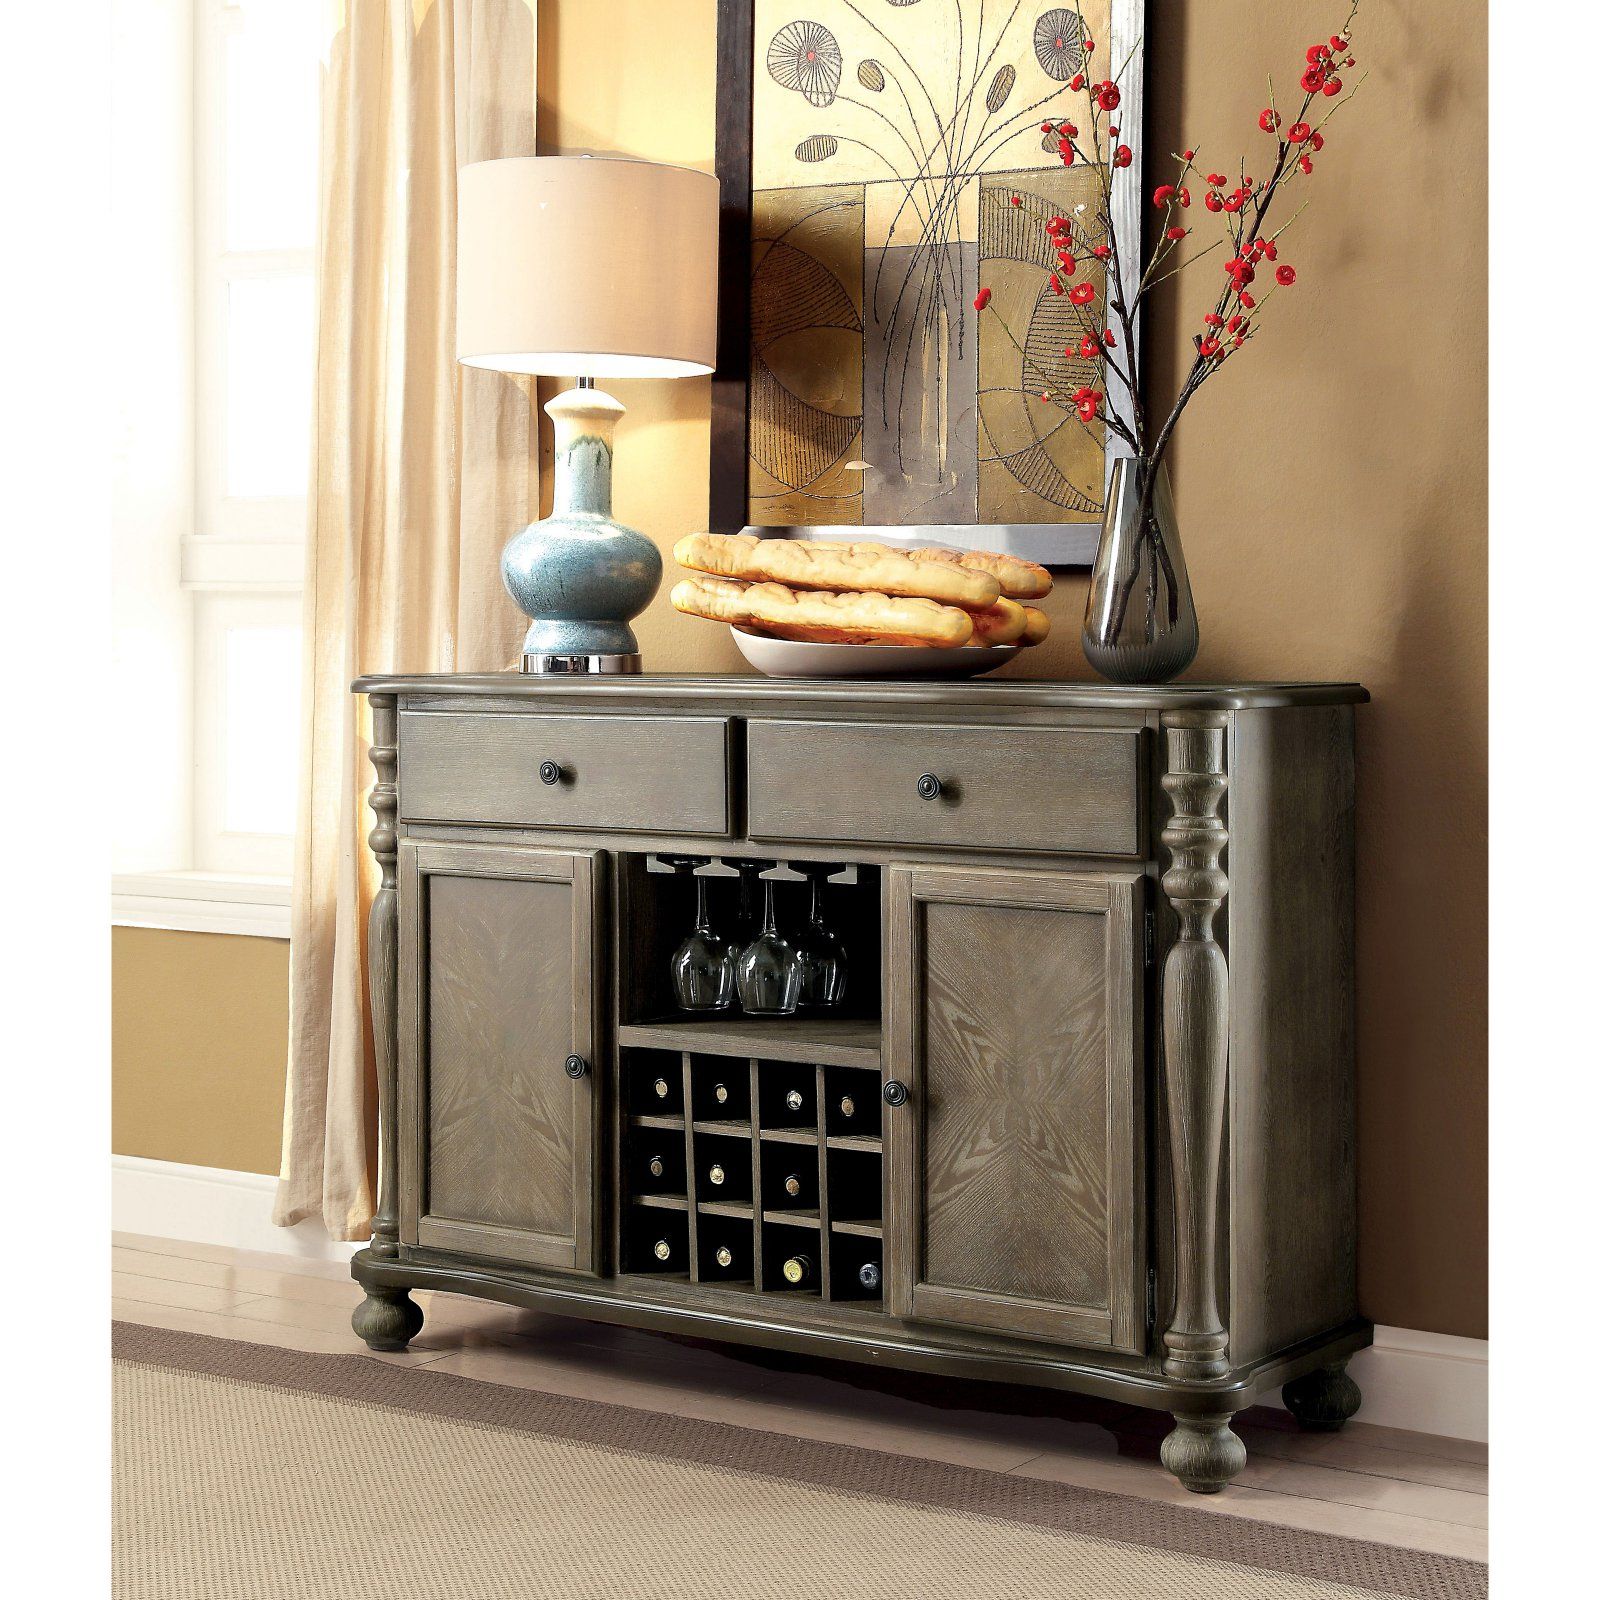 Furniture Of America Lillian Traditional Server | Products With Regard To Adelbert Credenzas (View 15 of 20)